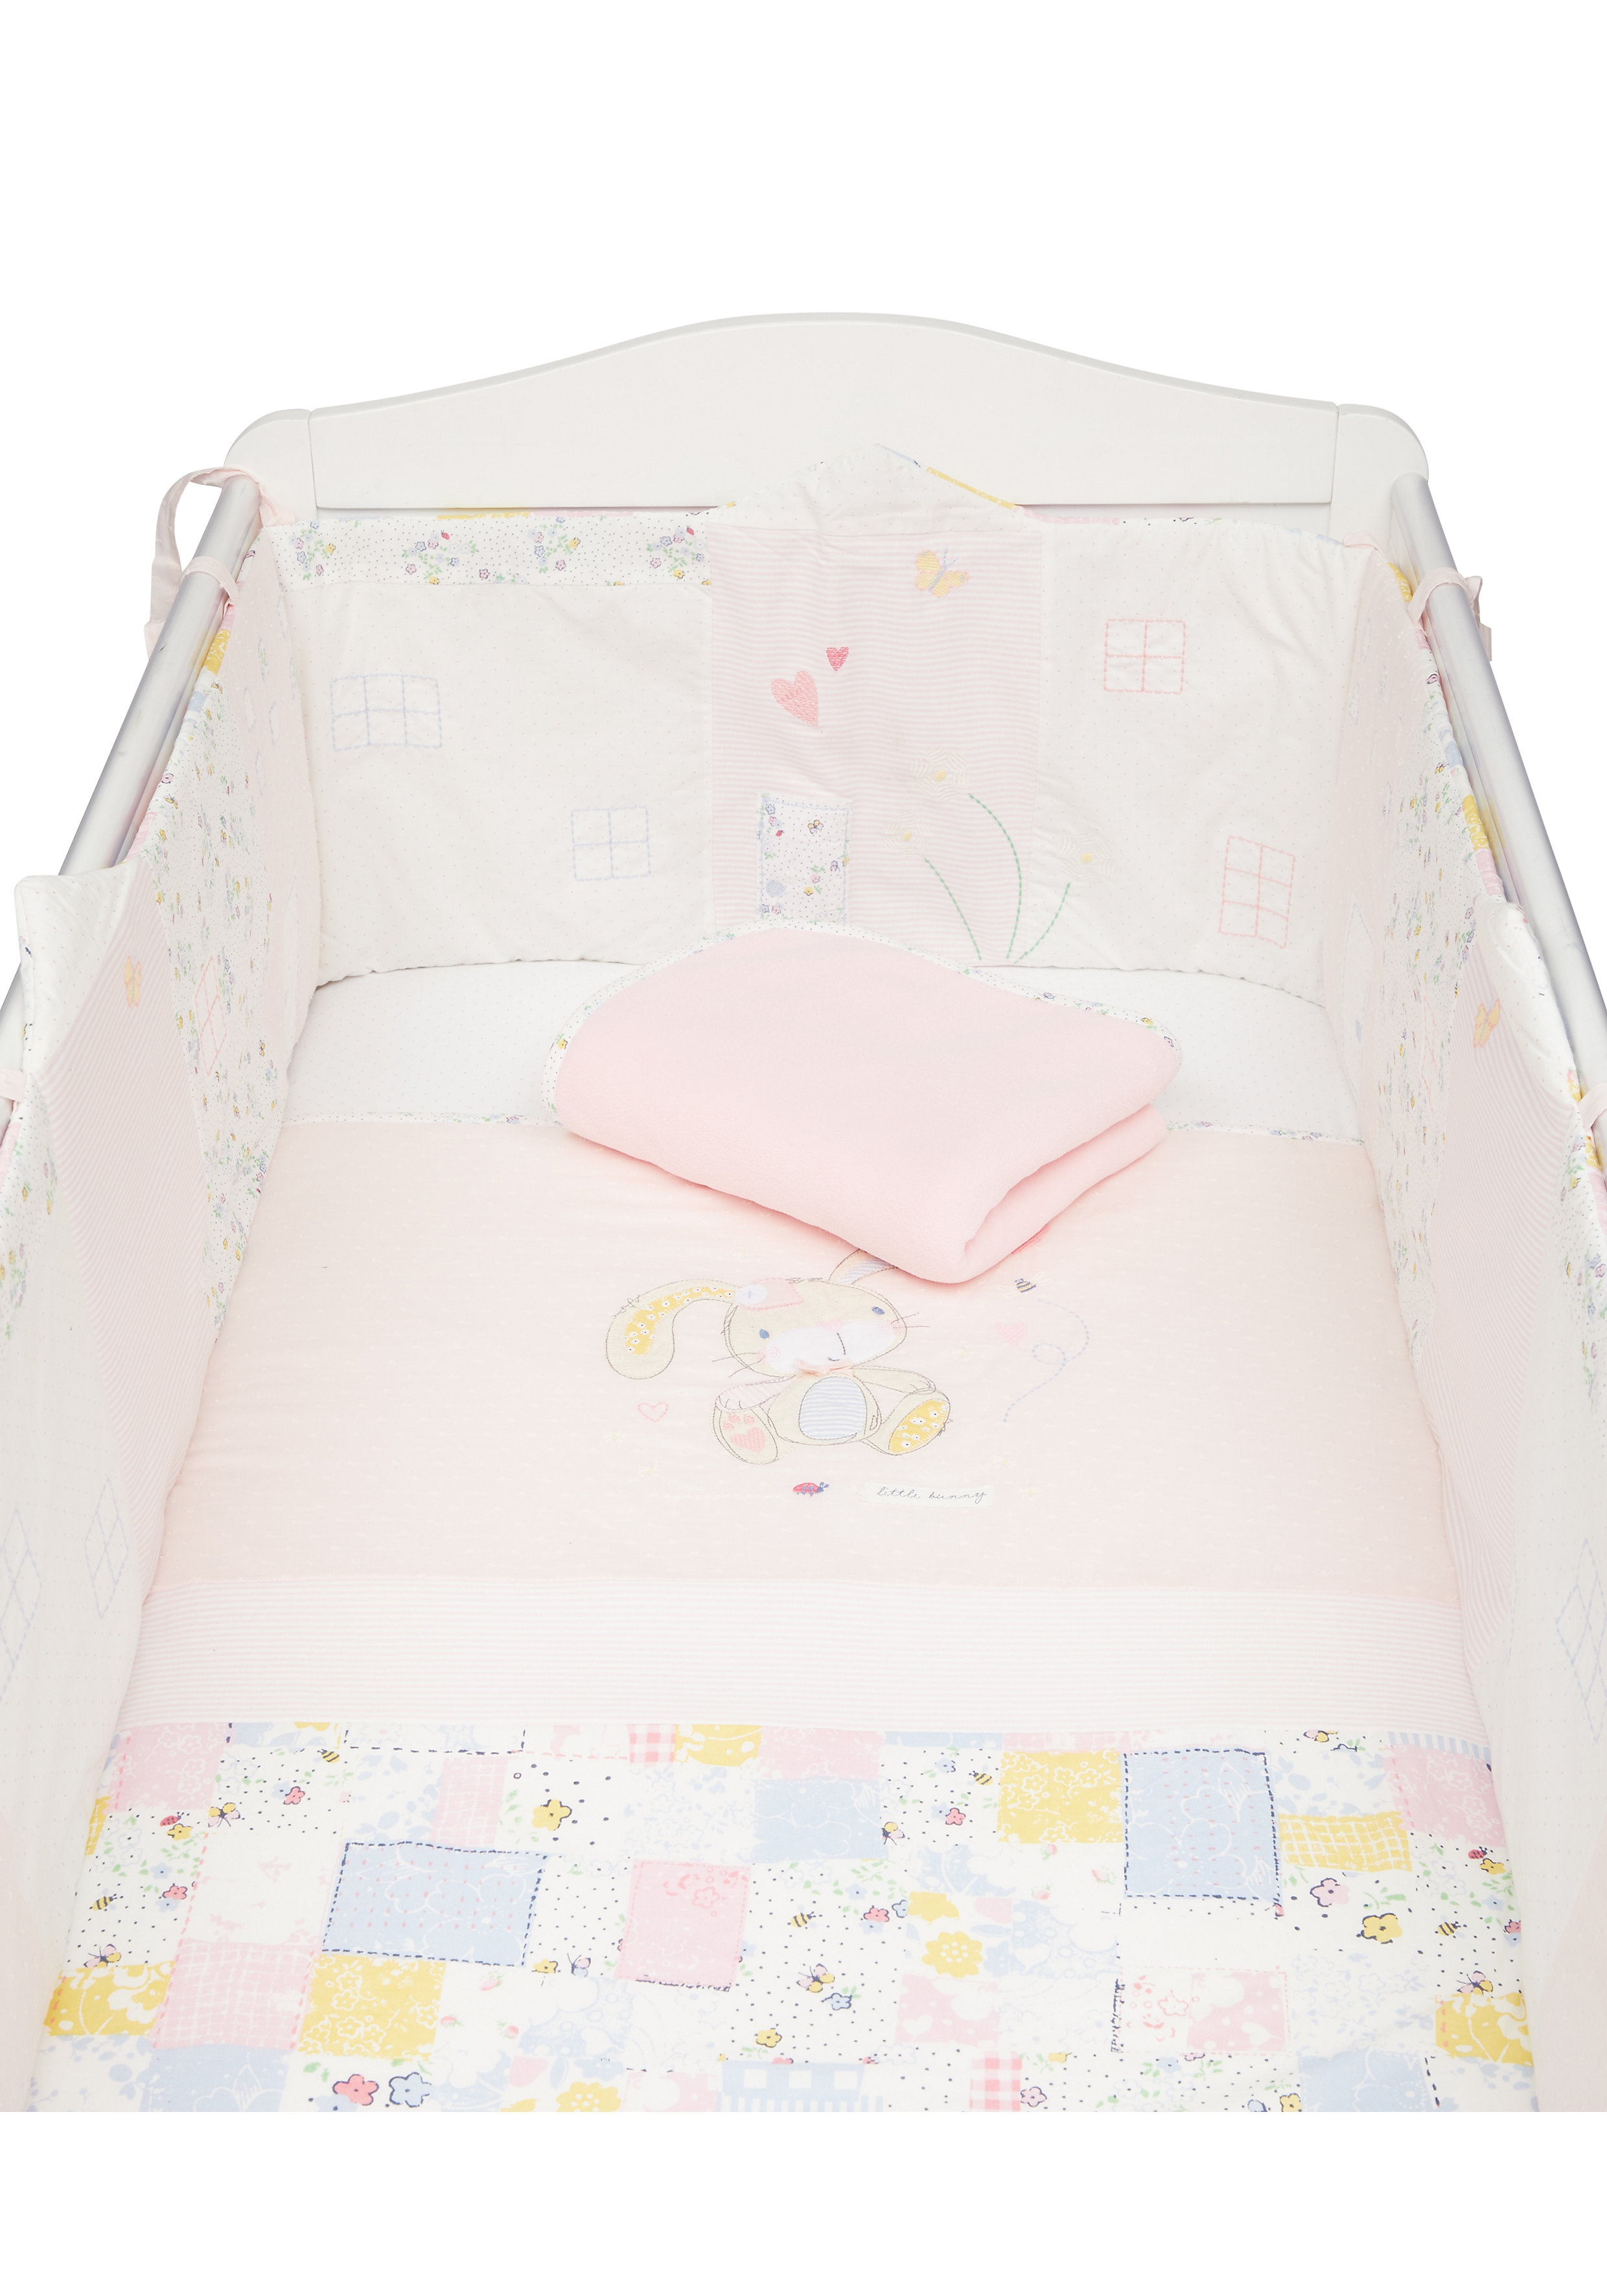 Mothercare | Mothercare Spring Flower 4 piece Bed In Bag  Bedding Set Pink